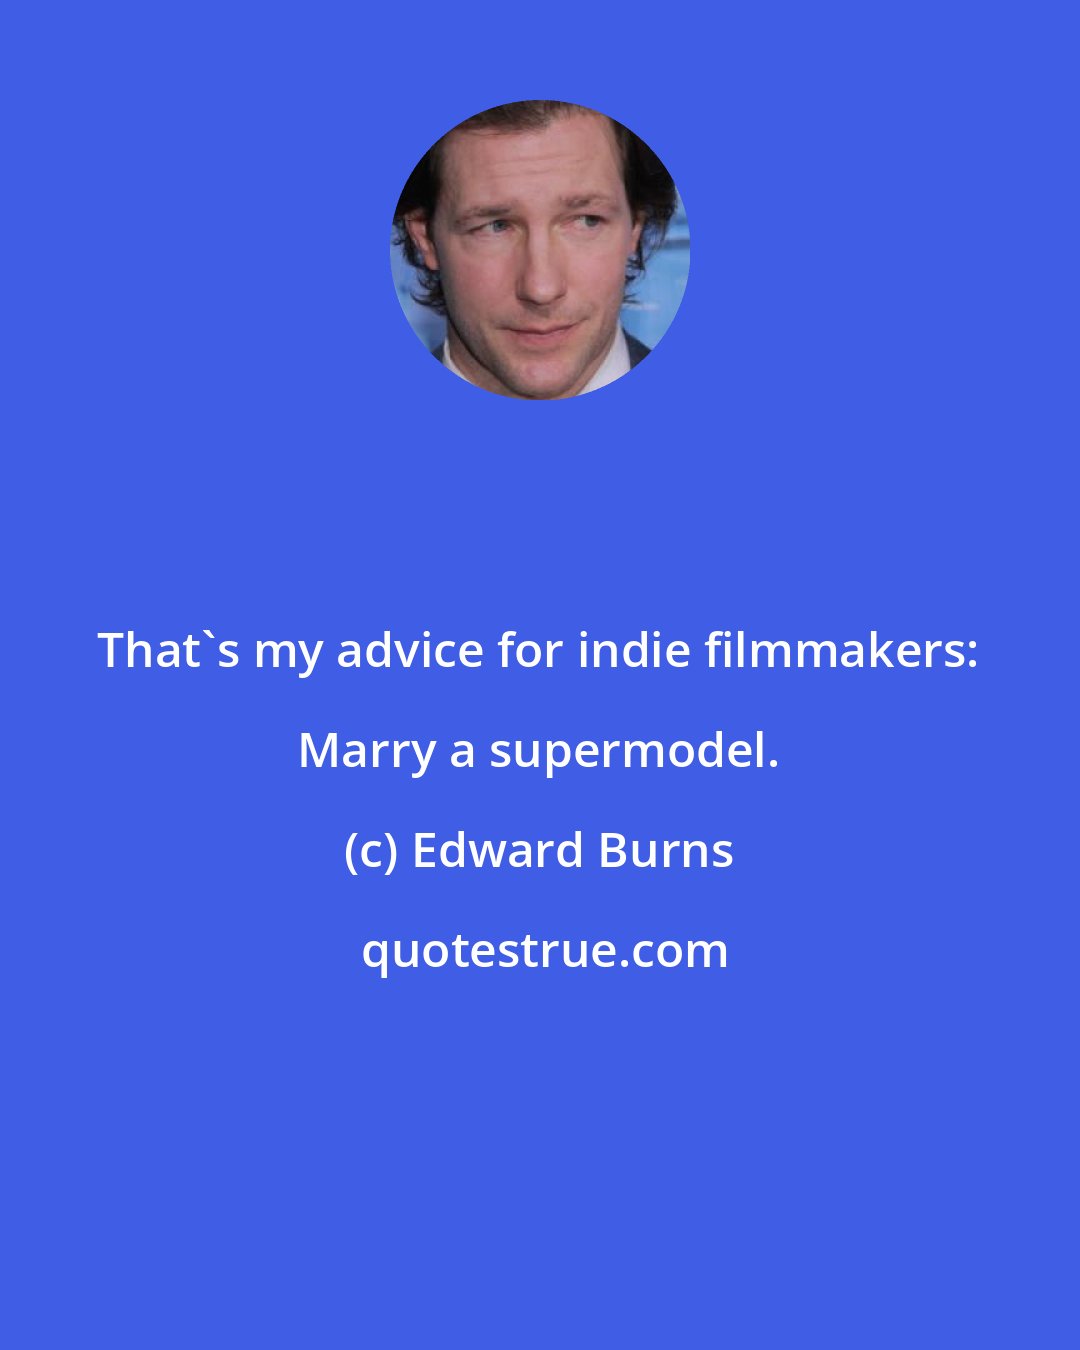 Edward Burns: That's my advice for indie filmmakers: Marry a supermodel.